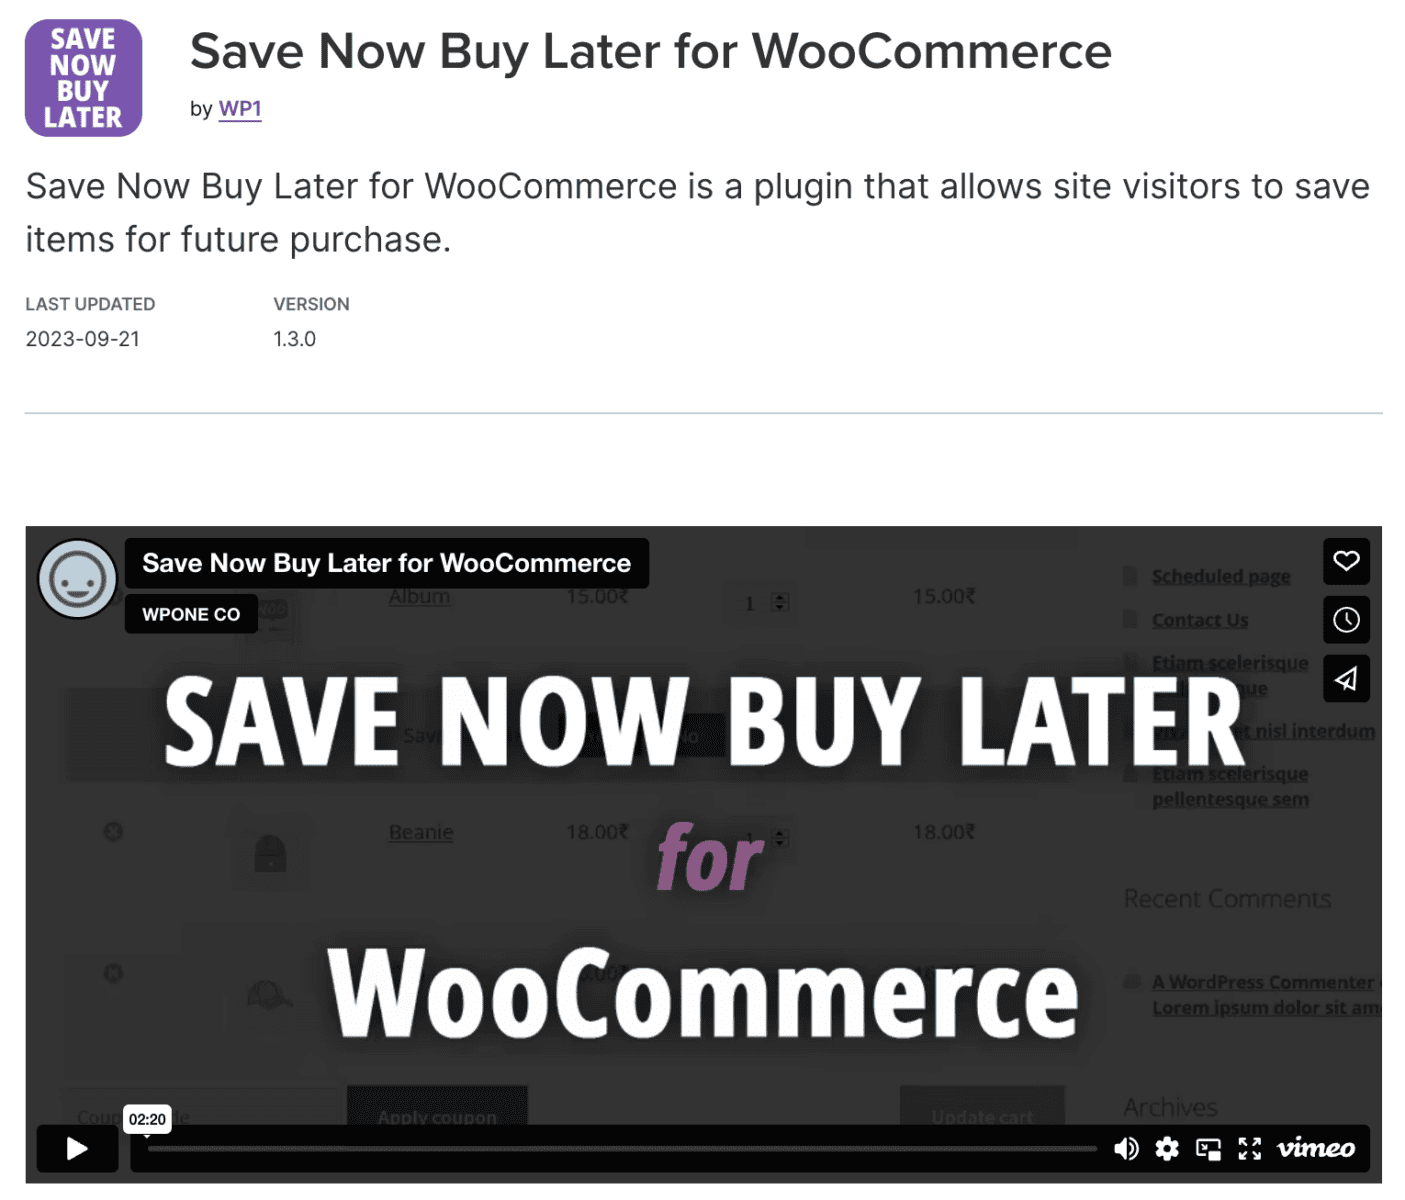 Save Now Buy Later for WooCommerce